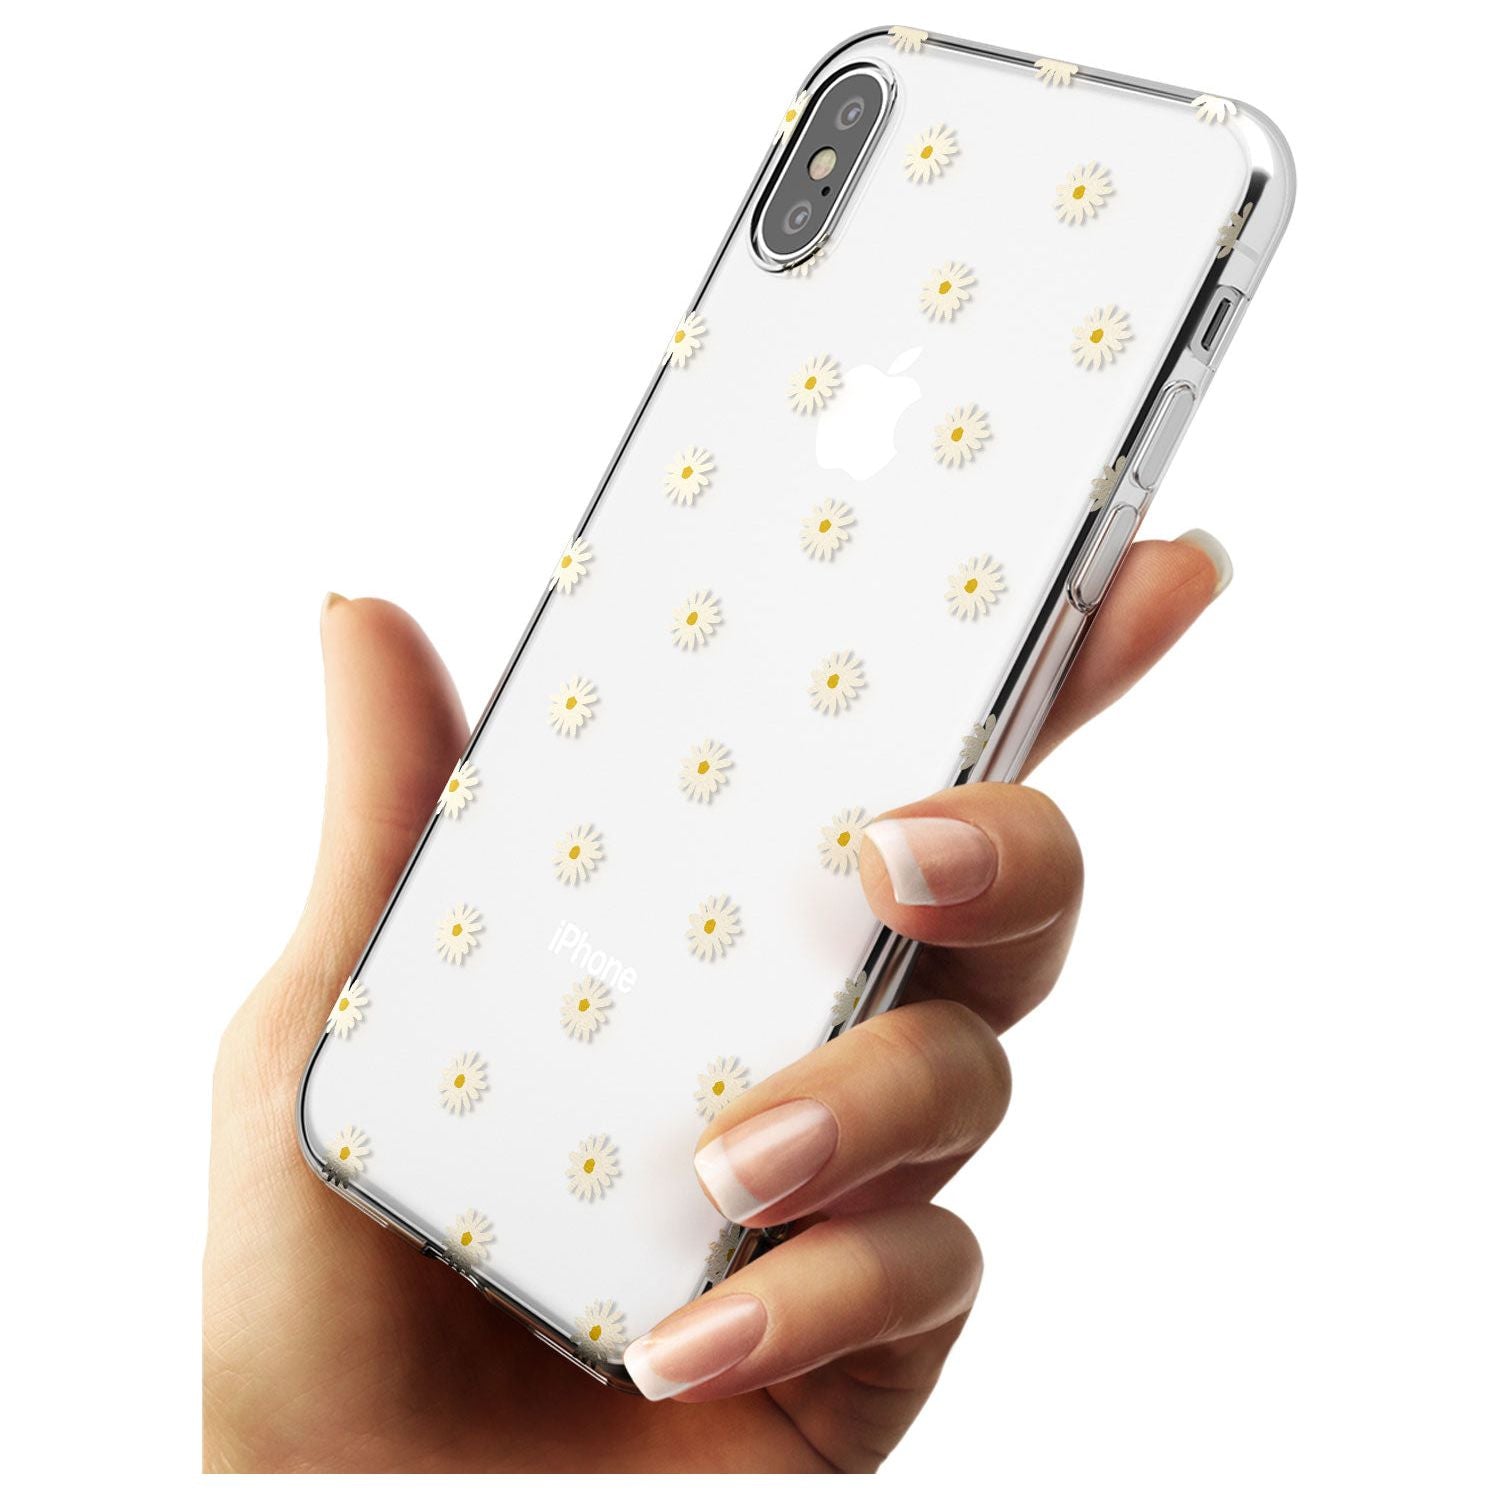 Daisy Pattern - Clear  Cute Floral Design Black Impact Phone Case for iPhone X XS Max XR